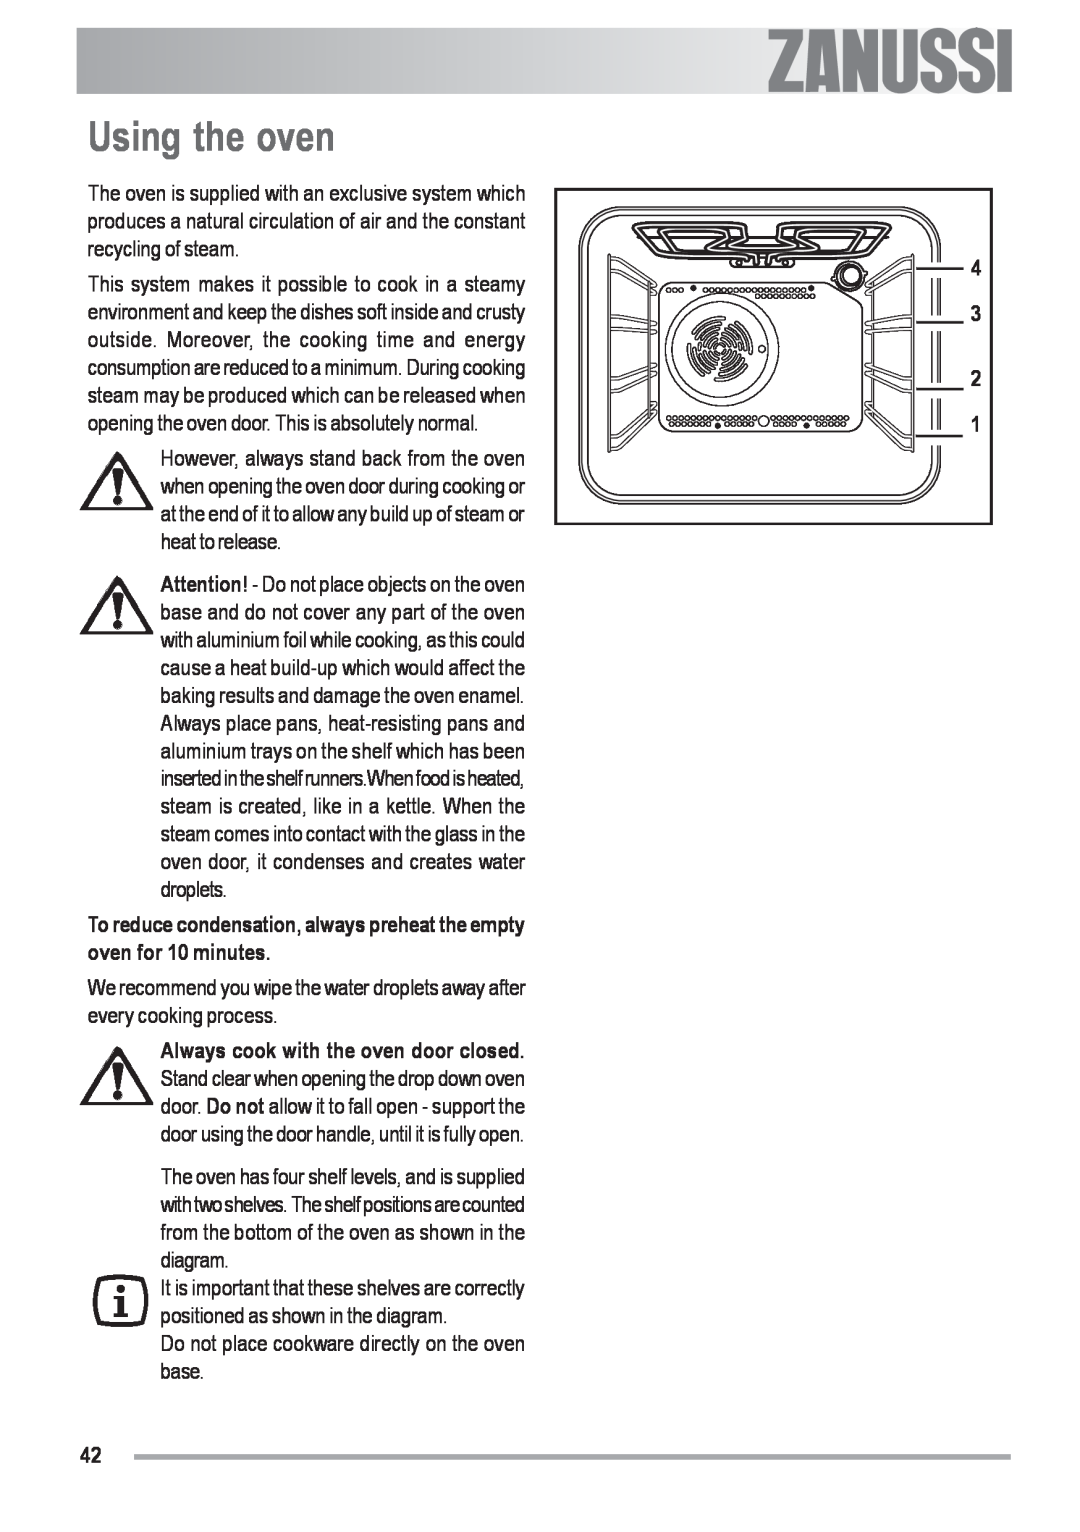 Zanussi ZOU 592 user manual Using the oven, To reduce condensation, always preheat the empty oven for 10 minutes 